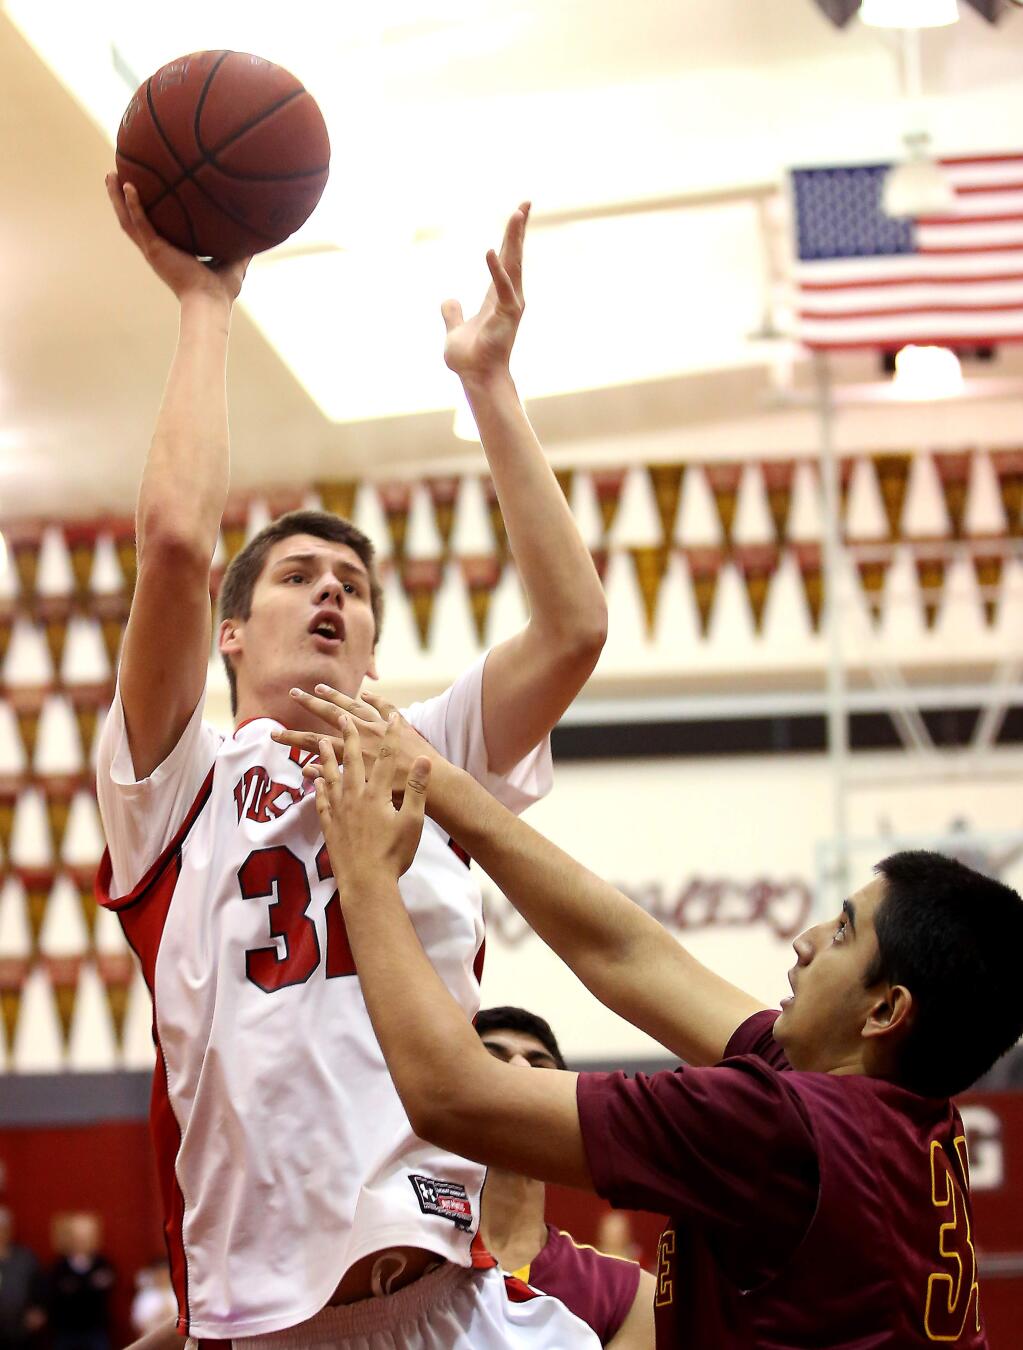 Montgomery's Eric Poulsen is fouled as he goes up for a shot against Northgate's Daniel Gee defends during the game held at Montgomery High School, Friday, February 27, 2015. (Crista Jeremiason / The Press Democrat)